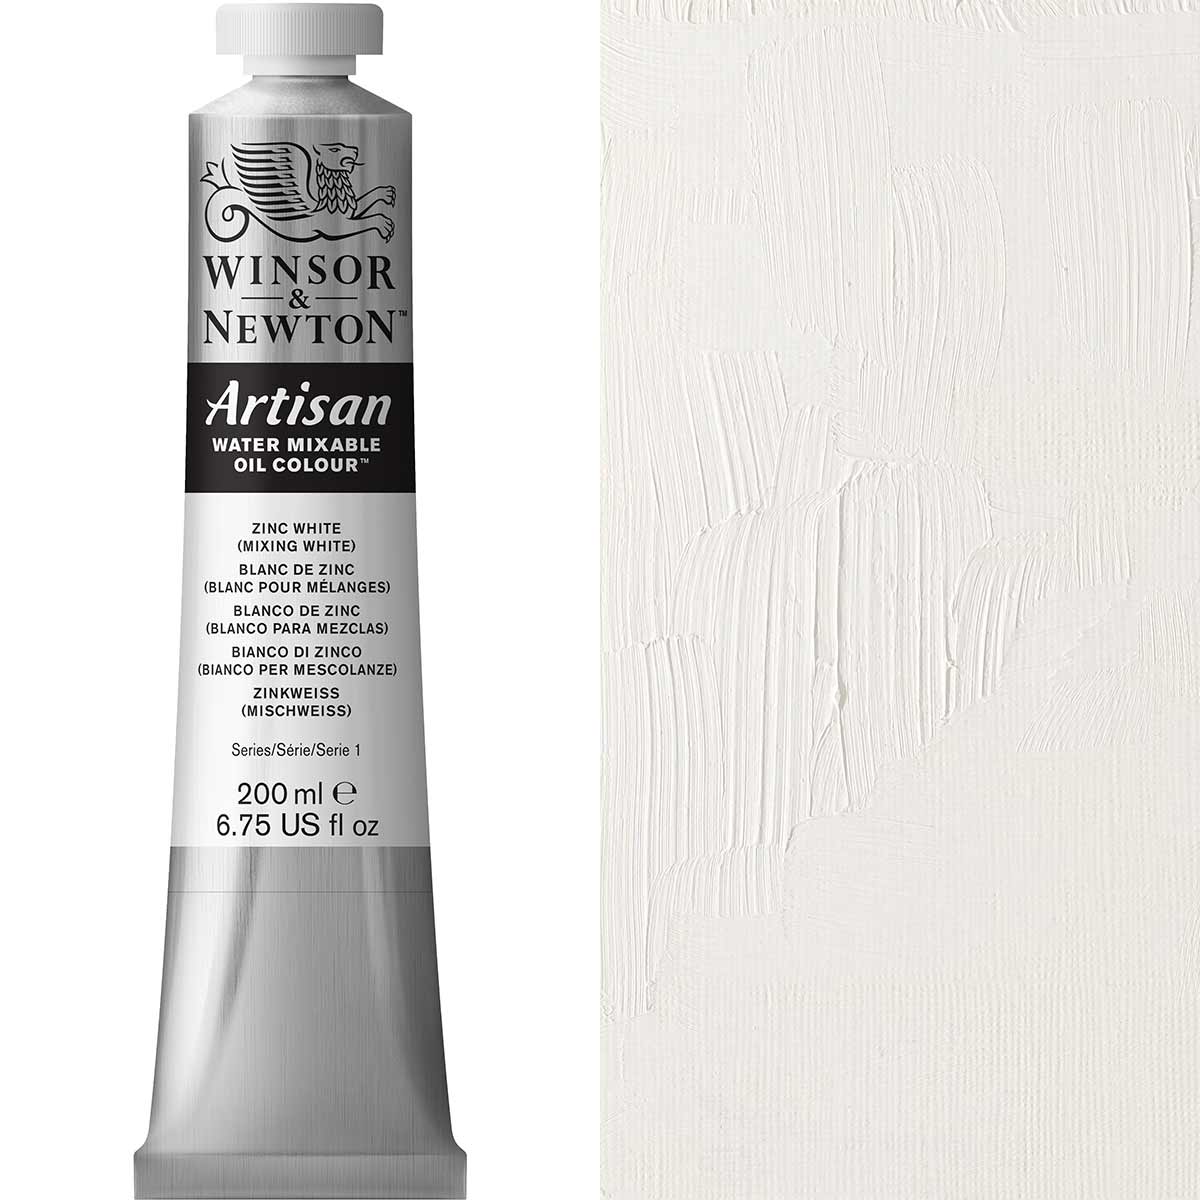 Winsor en Newton - Artisan Oil Color Water Mixable - 200 ml - Zink Menging White